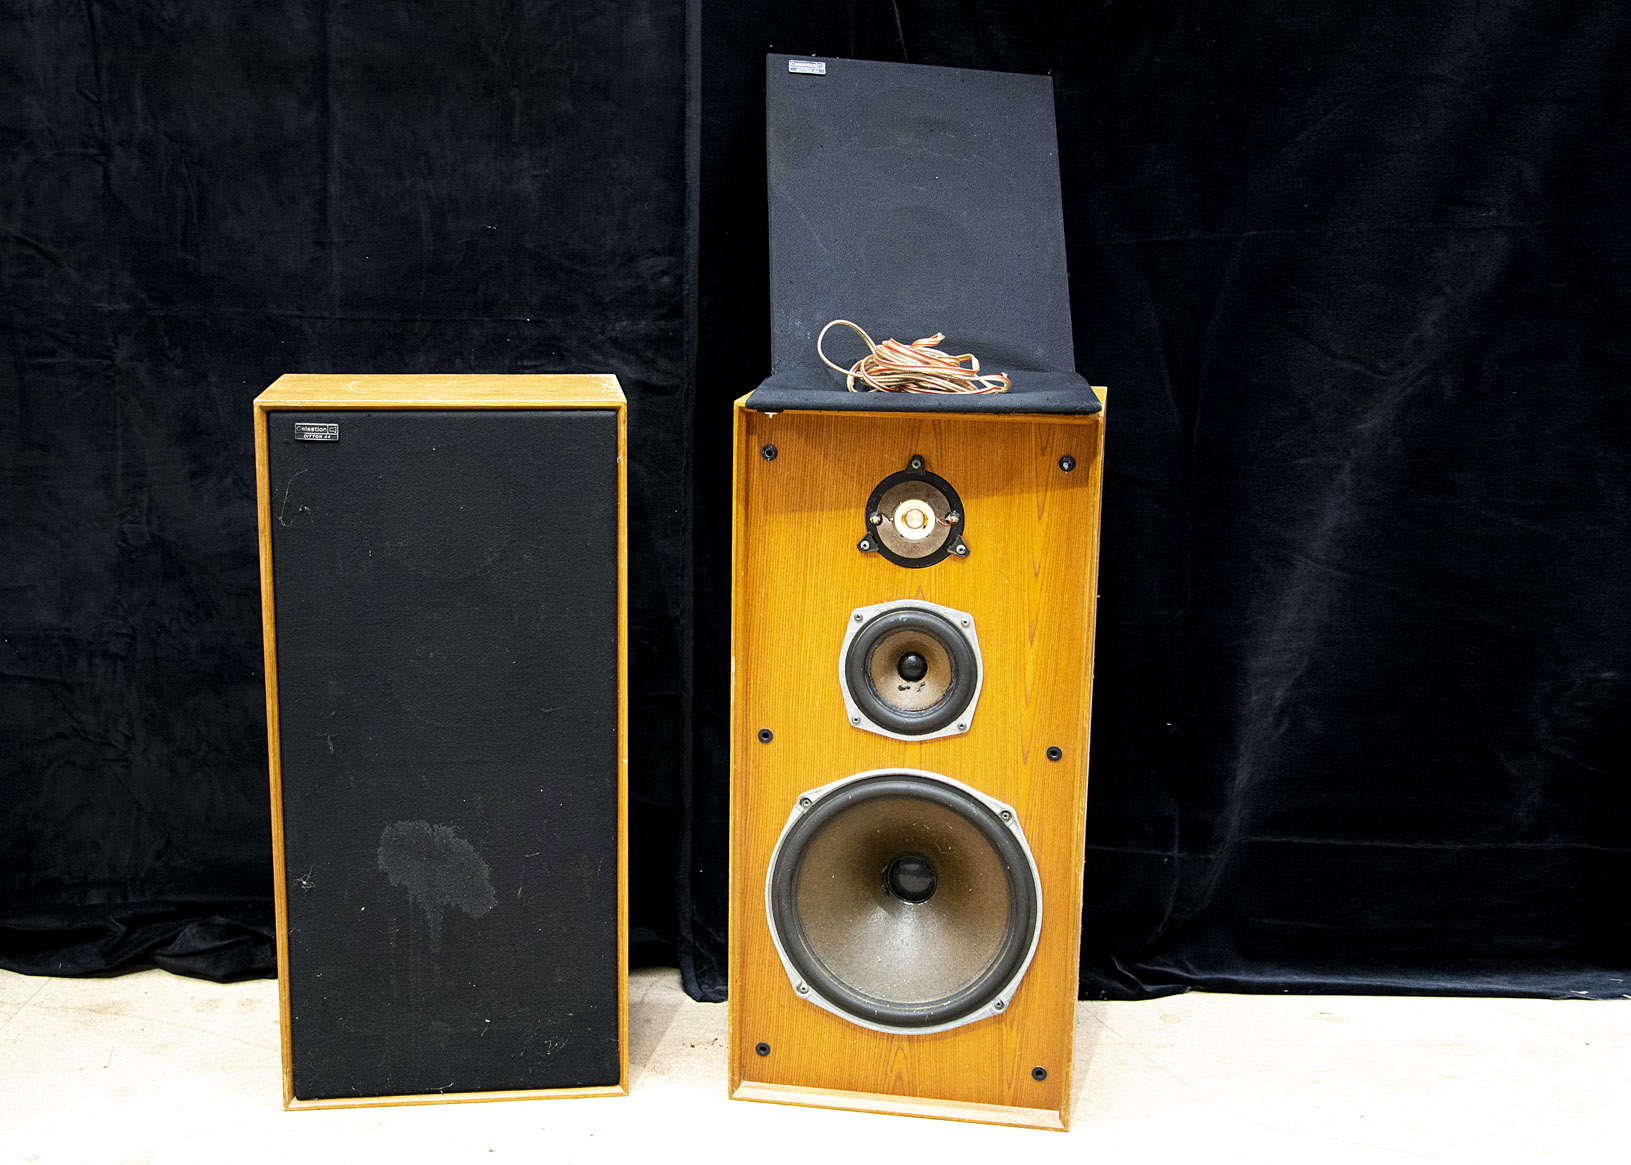 Celestion Ditton Speakers, a pair of Celestion Ditton 44 speakers, some marks on cases and front